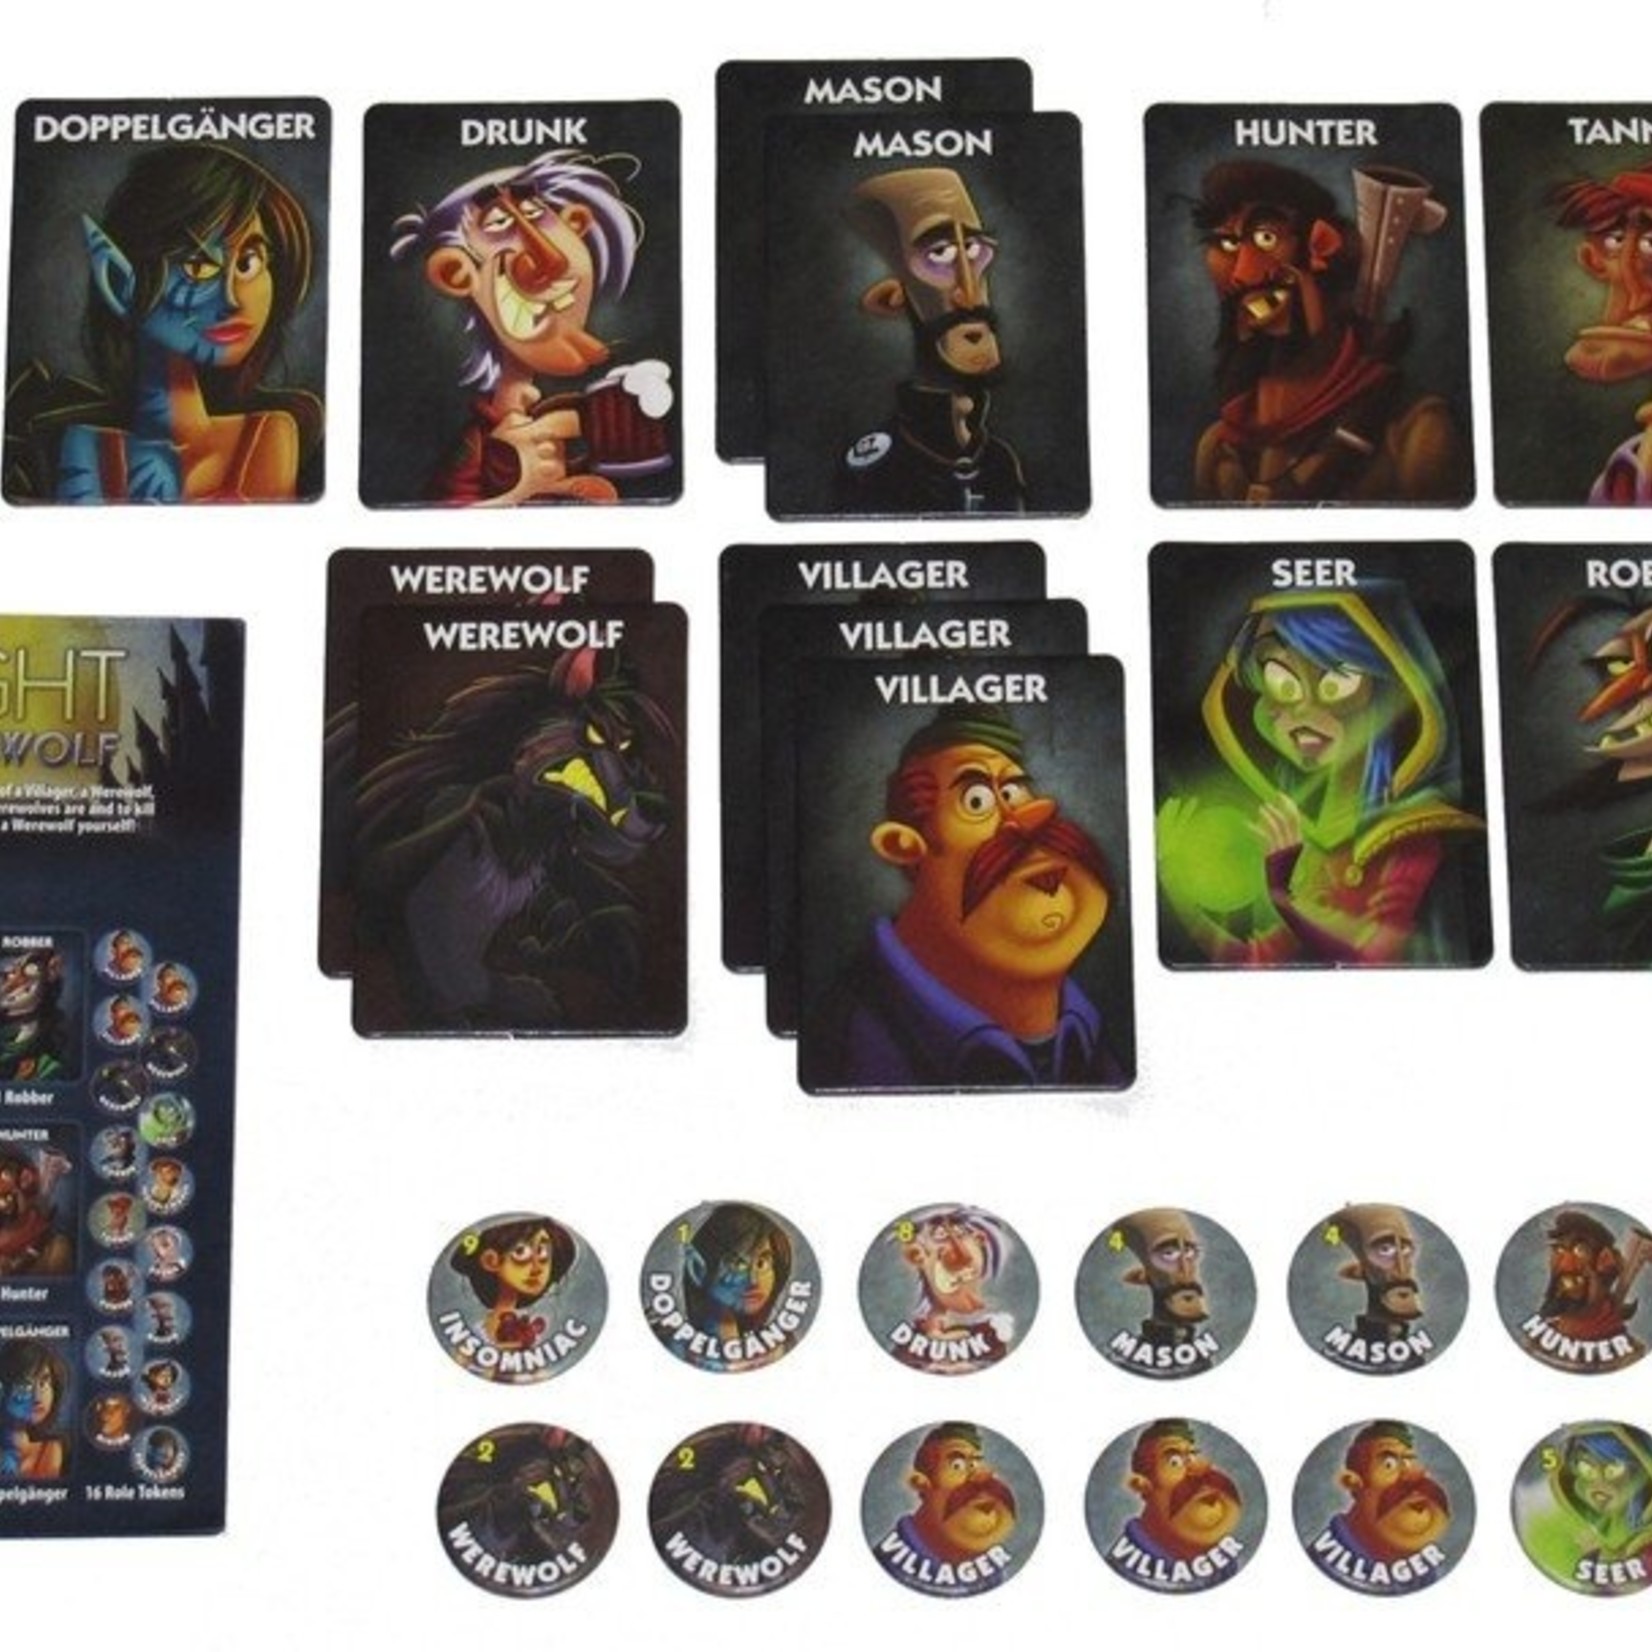 Tabletop Tuesday: 'One Night Ultimate Werewolf